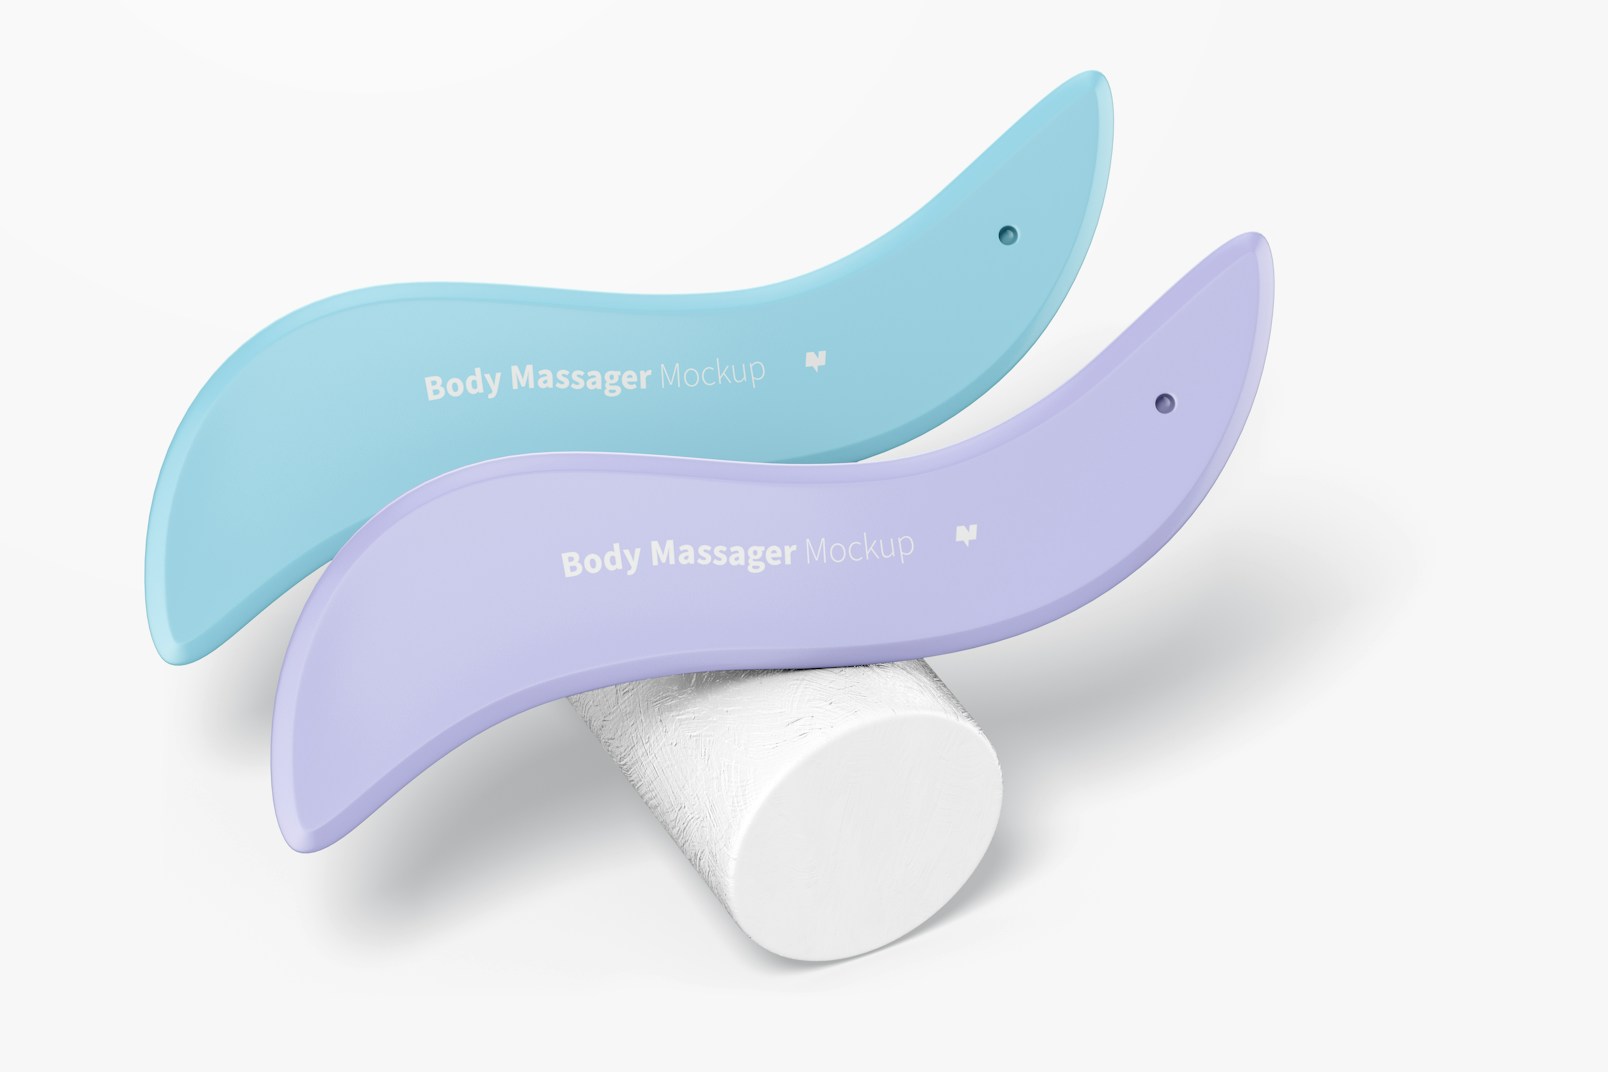 Body Massagers on a Surface Mockup